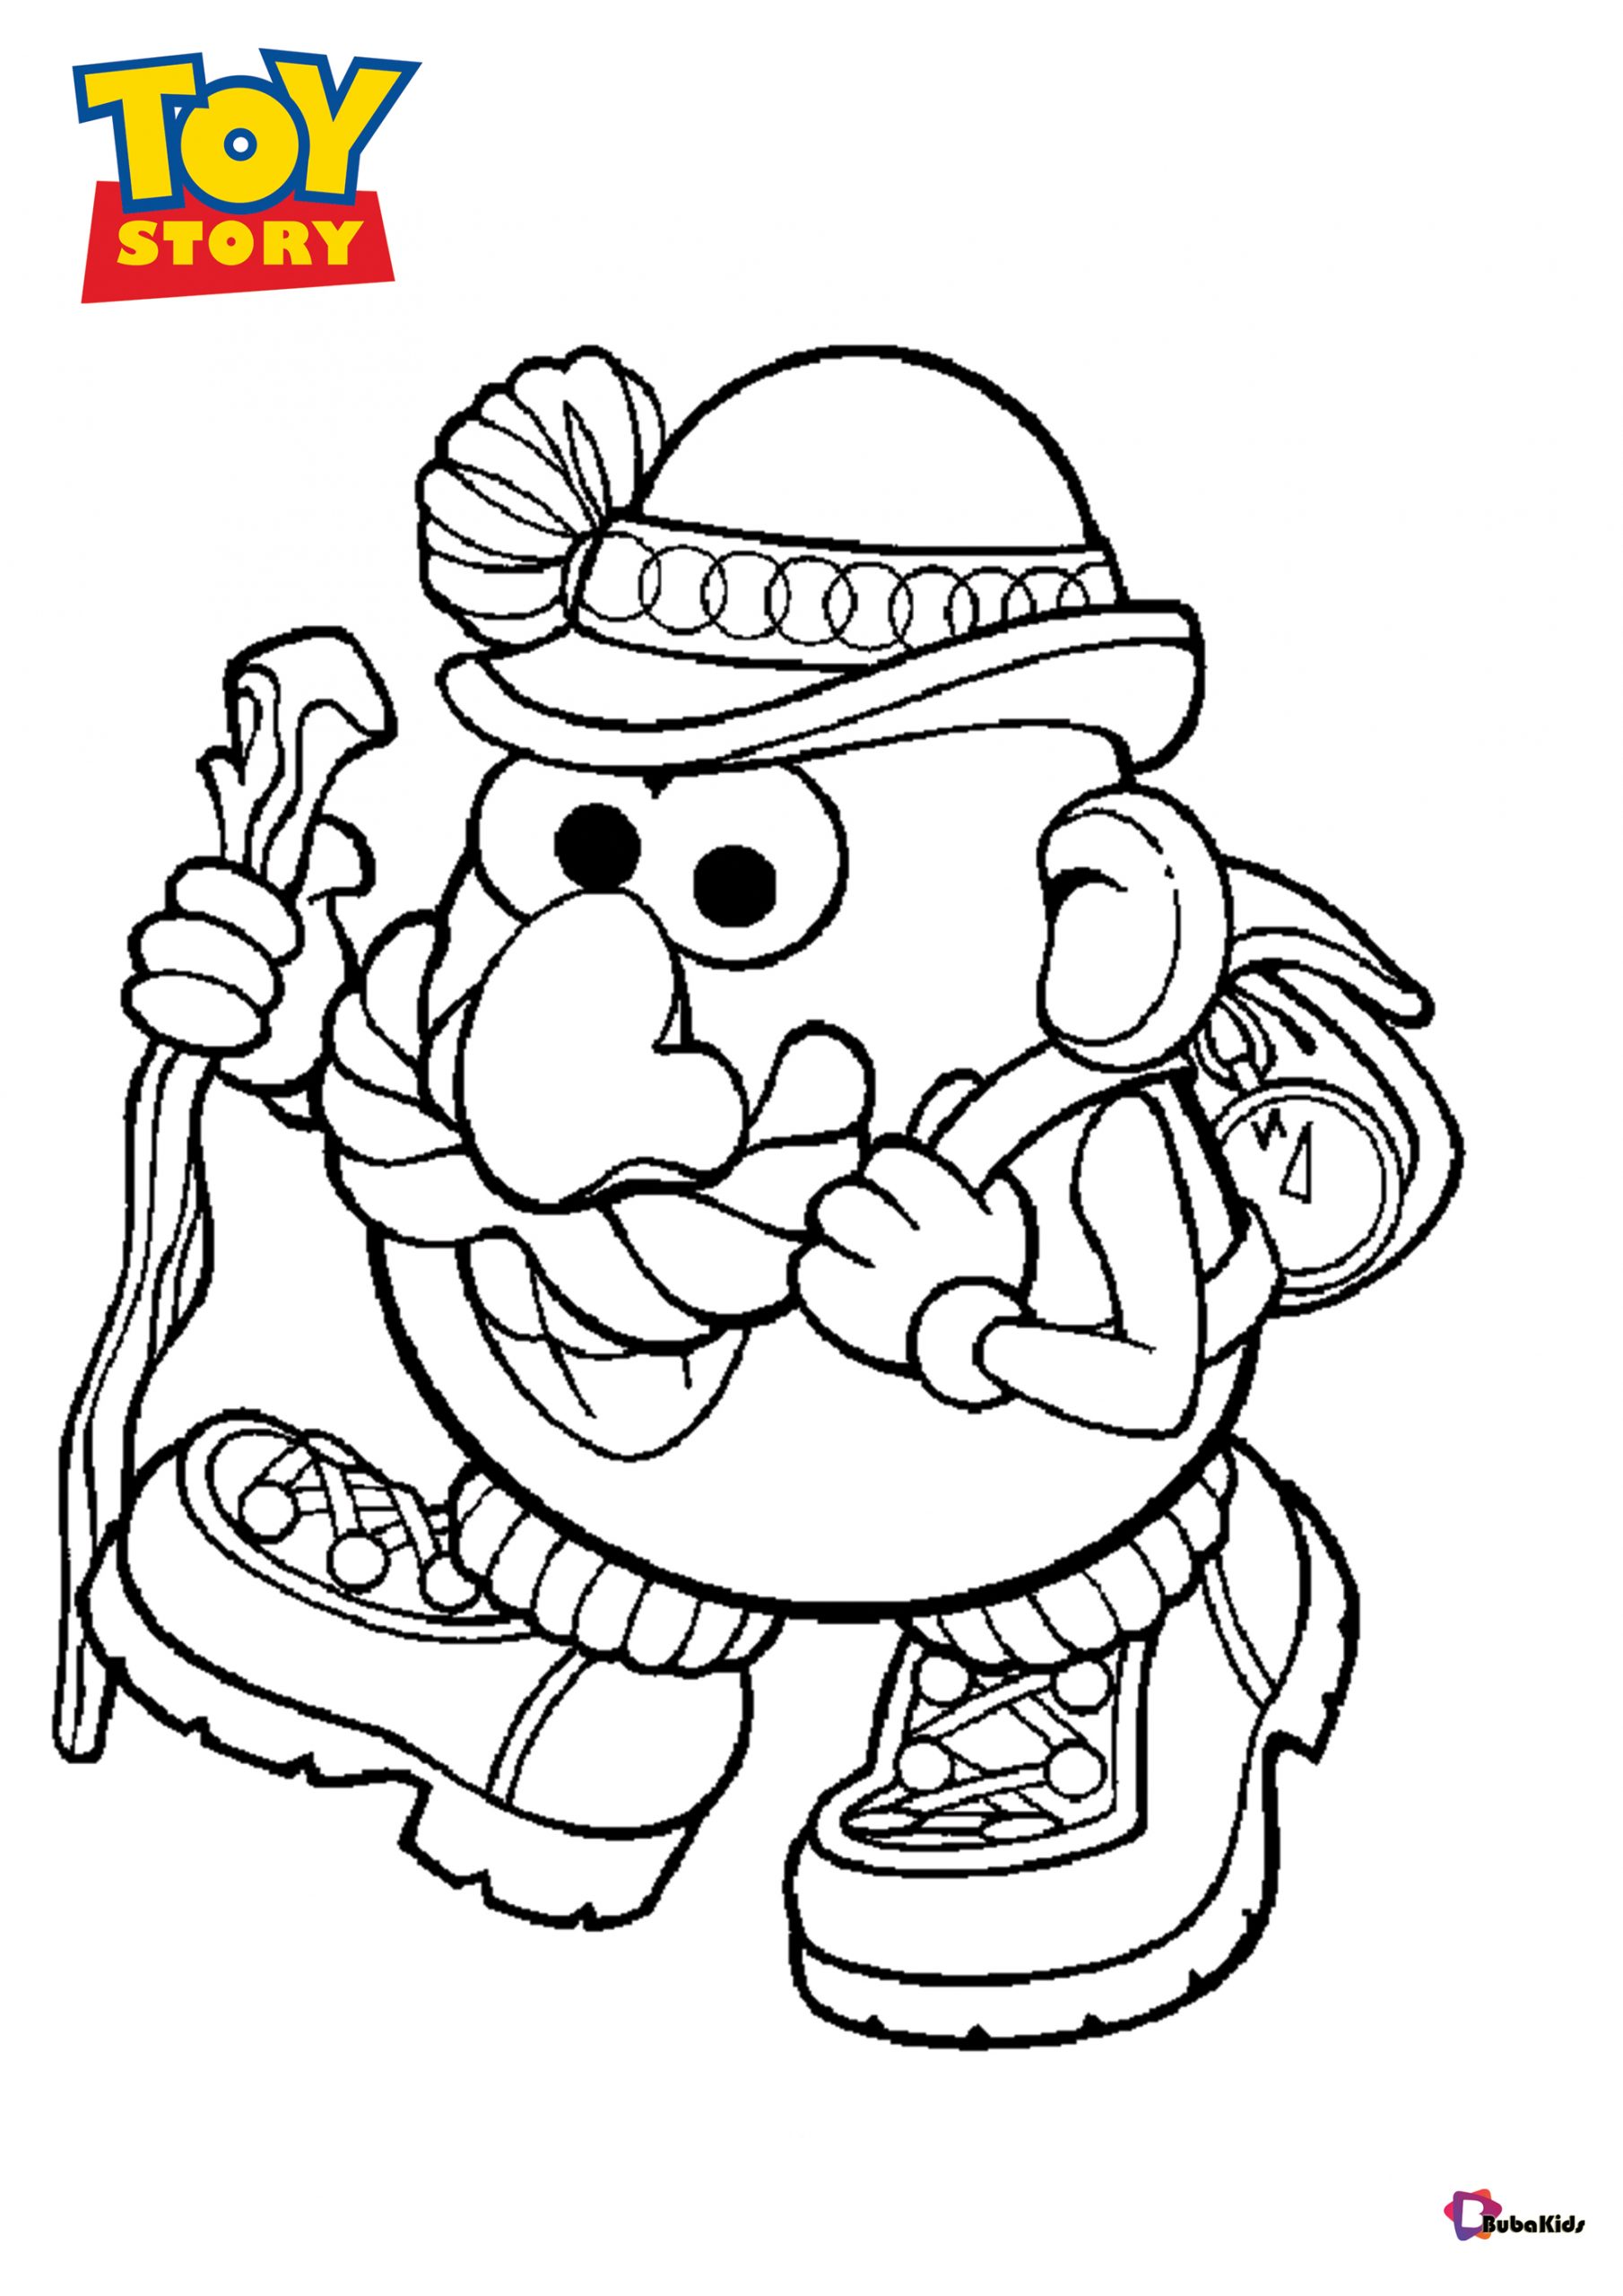 Mr potato head coloring pages to print and color